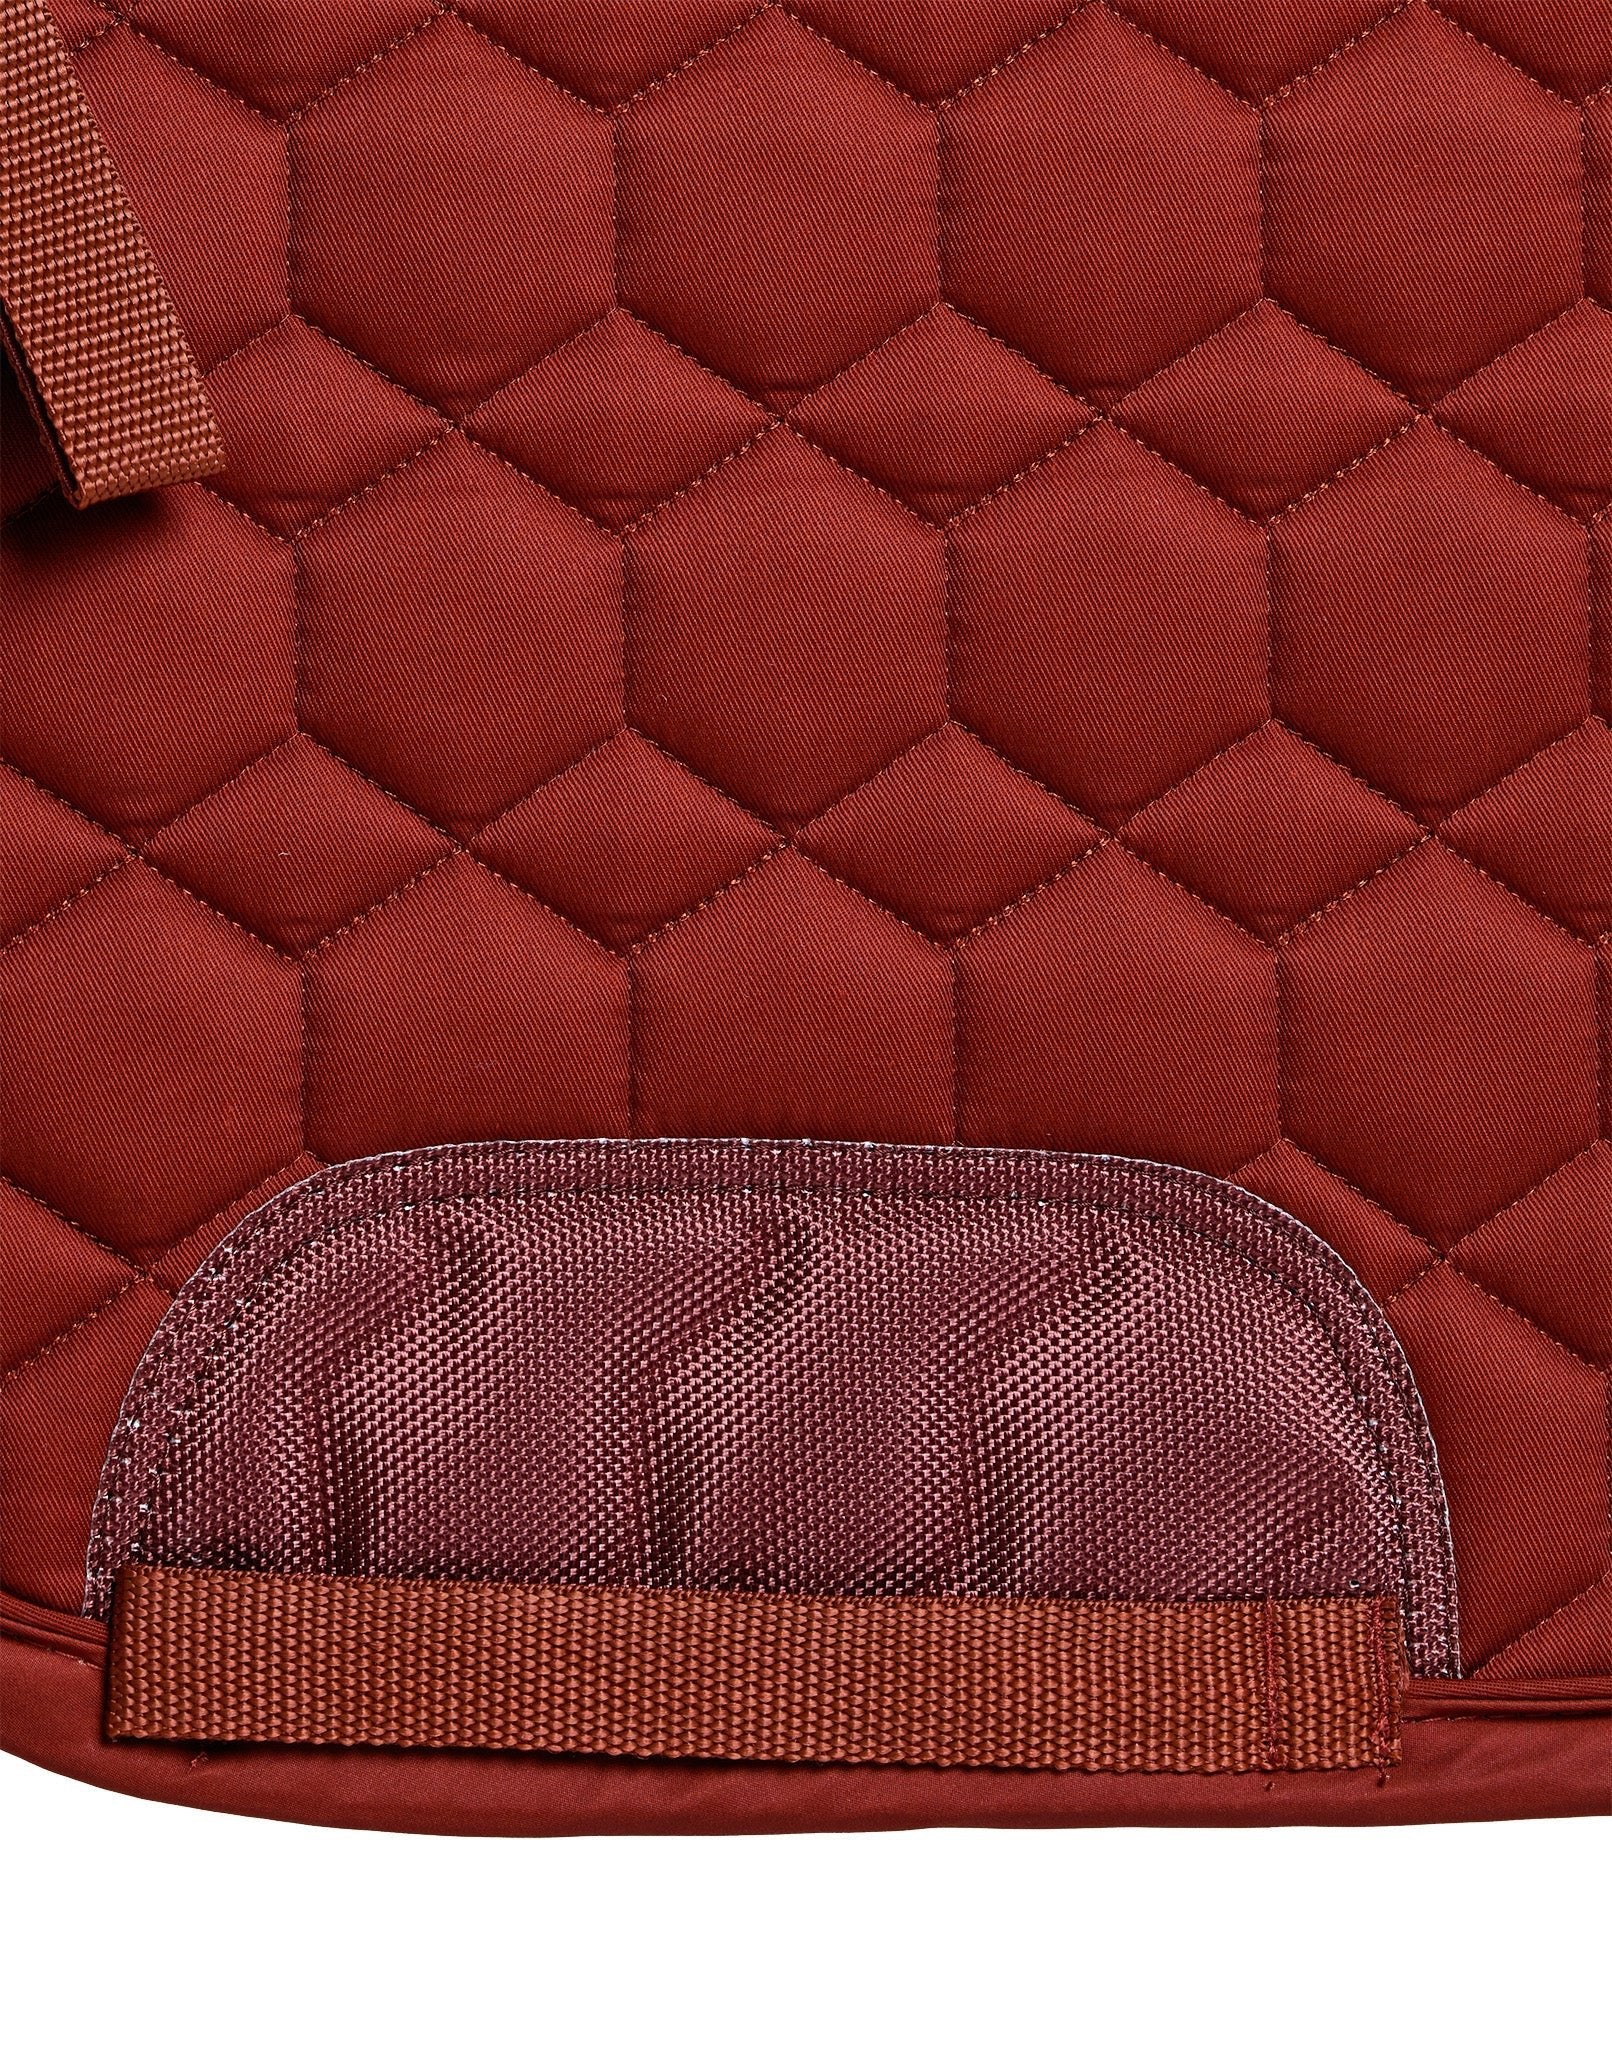 Equipad Dressage Saddle Pad - Henna Red - Equiluxe Tack